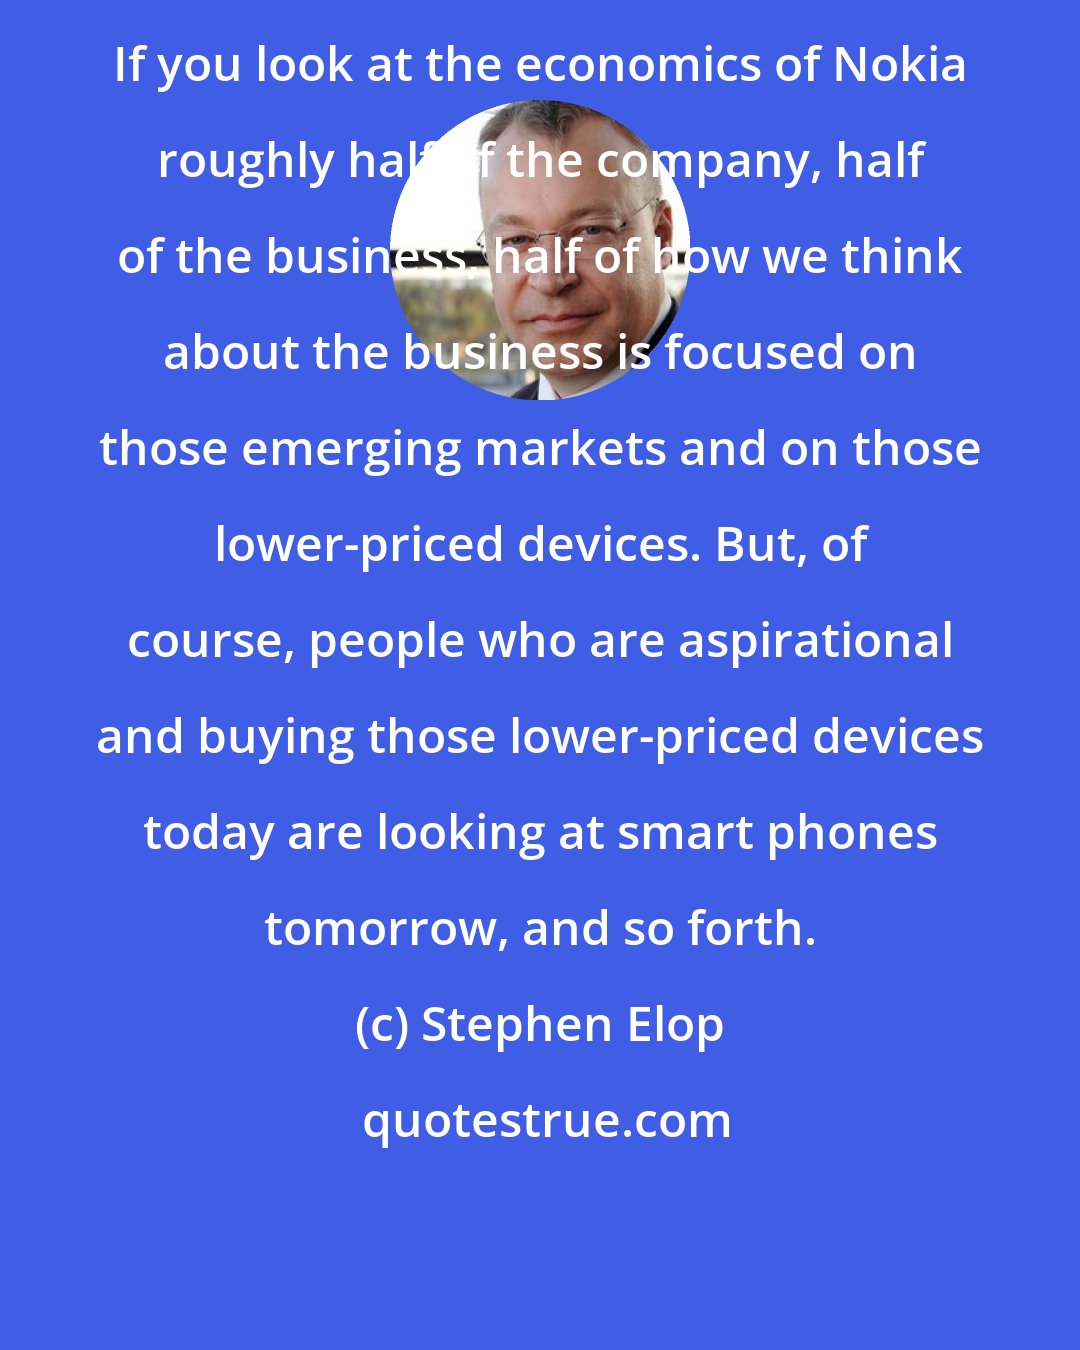 Stephen Elop: If you look at the economics of Nokia roughly half of the company, half of the business, half of how we think about the business is focused on those emerging markets and on those lower-priced devices. But, of course, people who are aspirational and buying those lower-priced devices today are looking at smart phones tomorrow, and so forth.